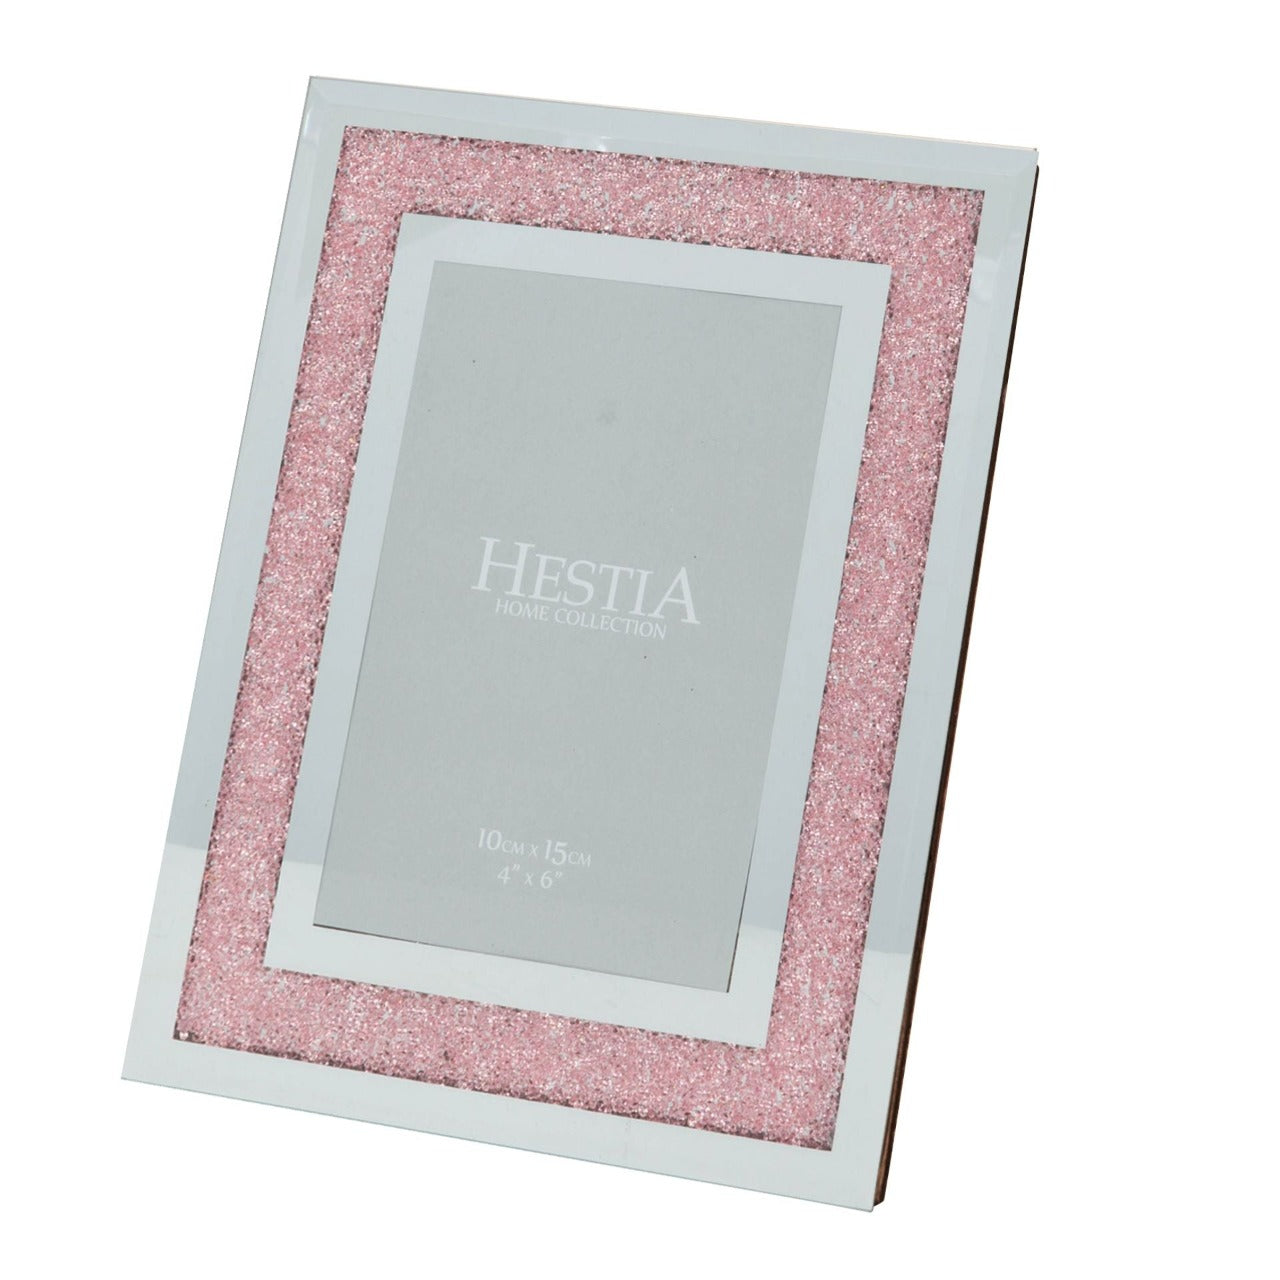 HESTIA Mirror & Blush Crystal Glass Picture Frame 4" x 6"  A mirror and blush crystal, 4" x 6" portrait photo frame, with blush pink crystal detailing. This contemporary photo frame brings a modern twist on the classic glass frame design.